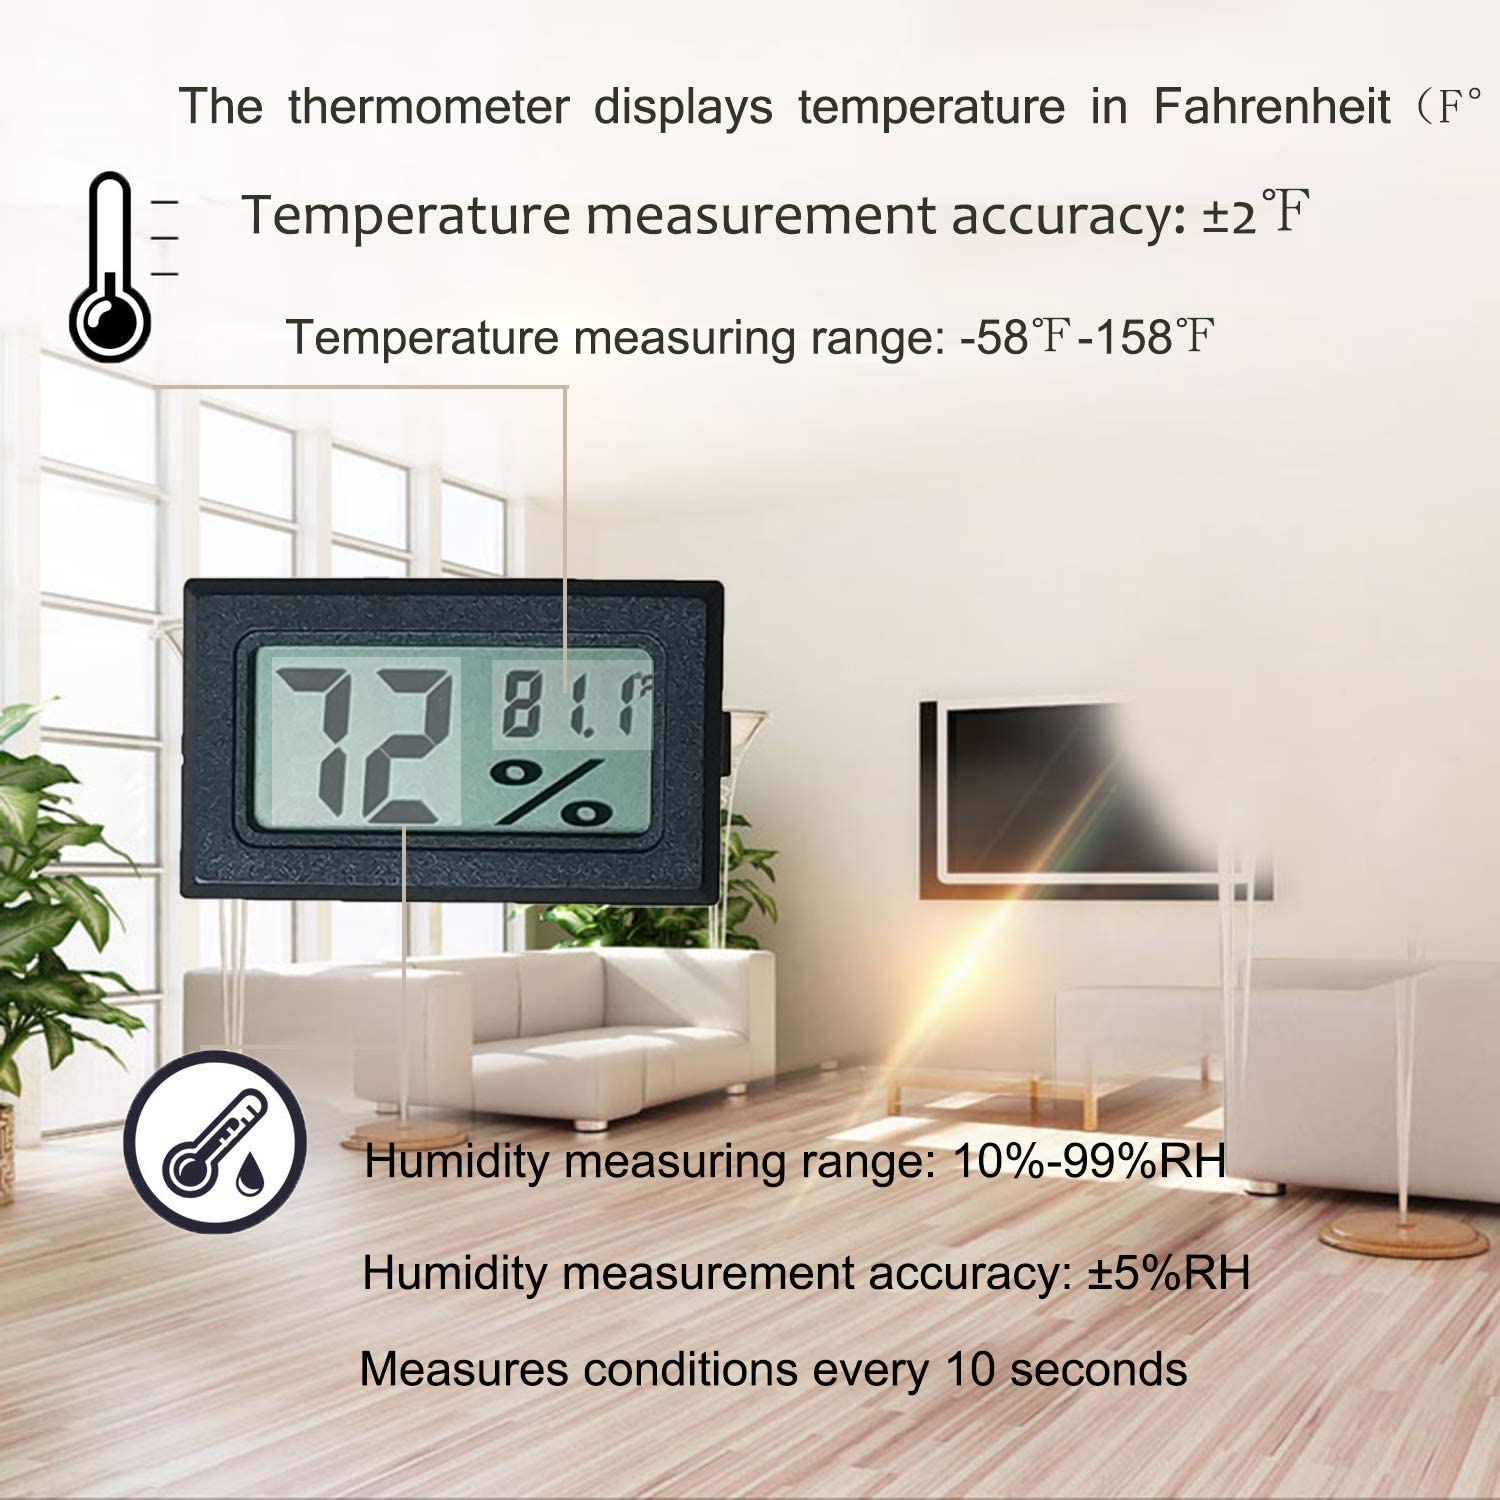 Ukulele Digital Hygrometer Humidity Gauge and Digital Thermometer (°F) -  Terry Carter Music Store